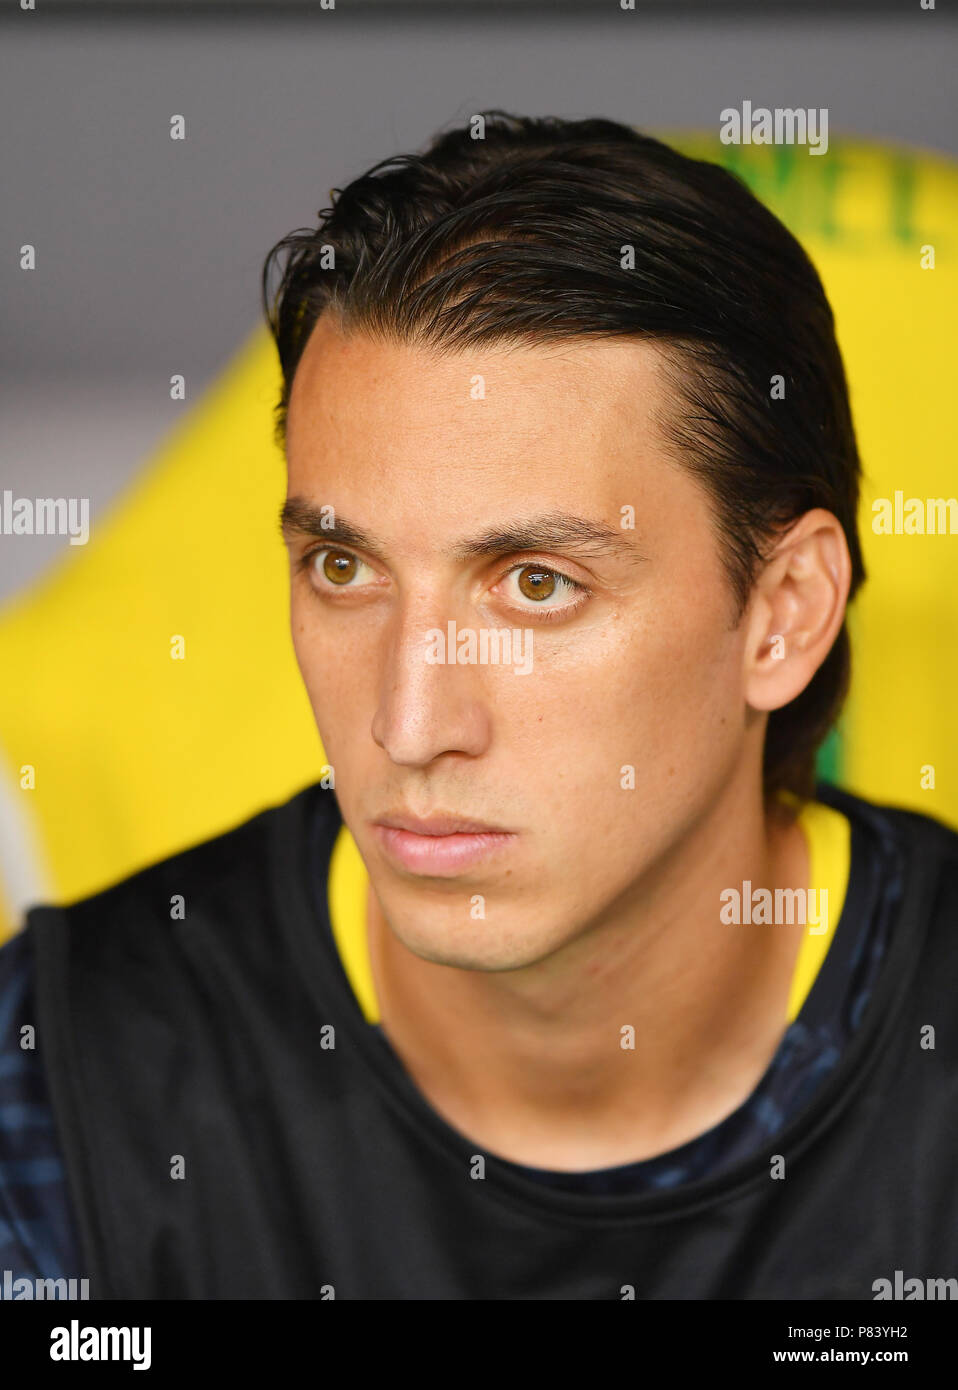 SAMARA, RUSSIA - JULY 02: Pedro Geromel of Brazil during the 2018 FIFA World Cup Russia Round of 16 match between Brazil and Mexico at Samara Arena on July 2, 2018 in Samara, Russia. (Photo by Lukasz Laskowski/PressFocus/MB Media) Stock Photo